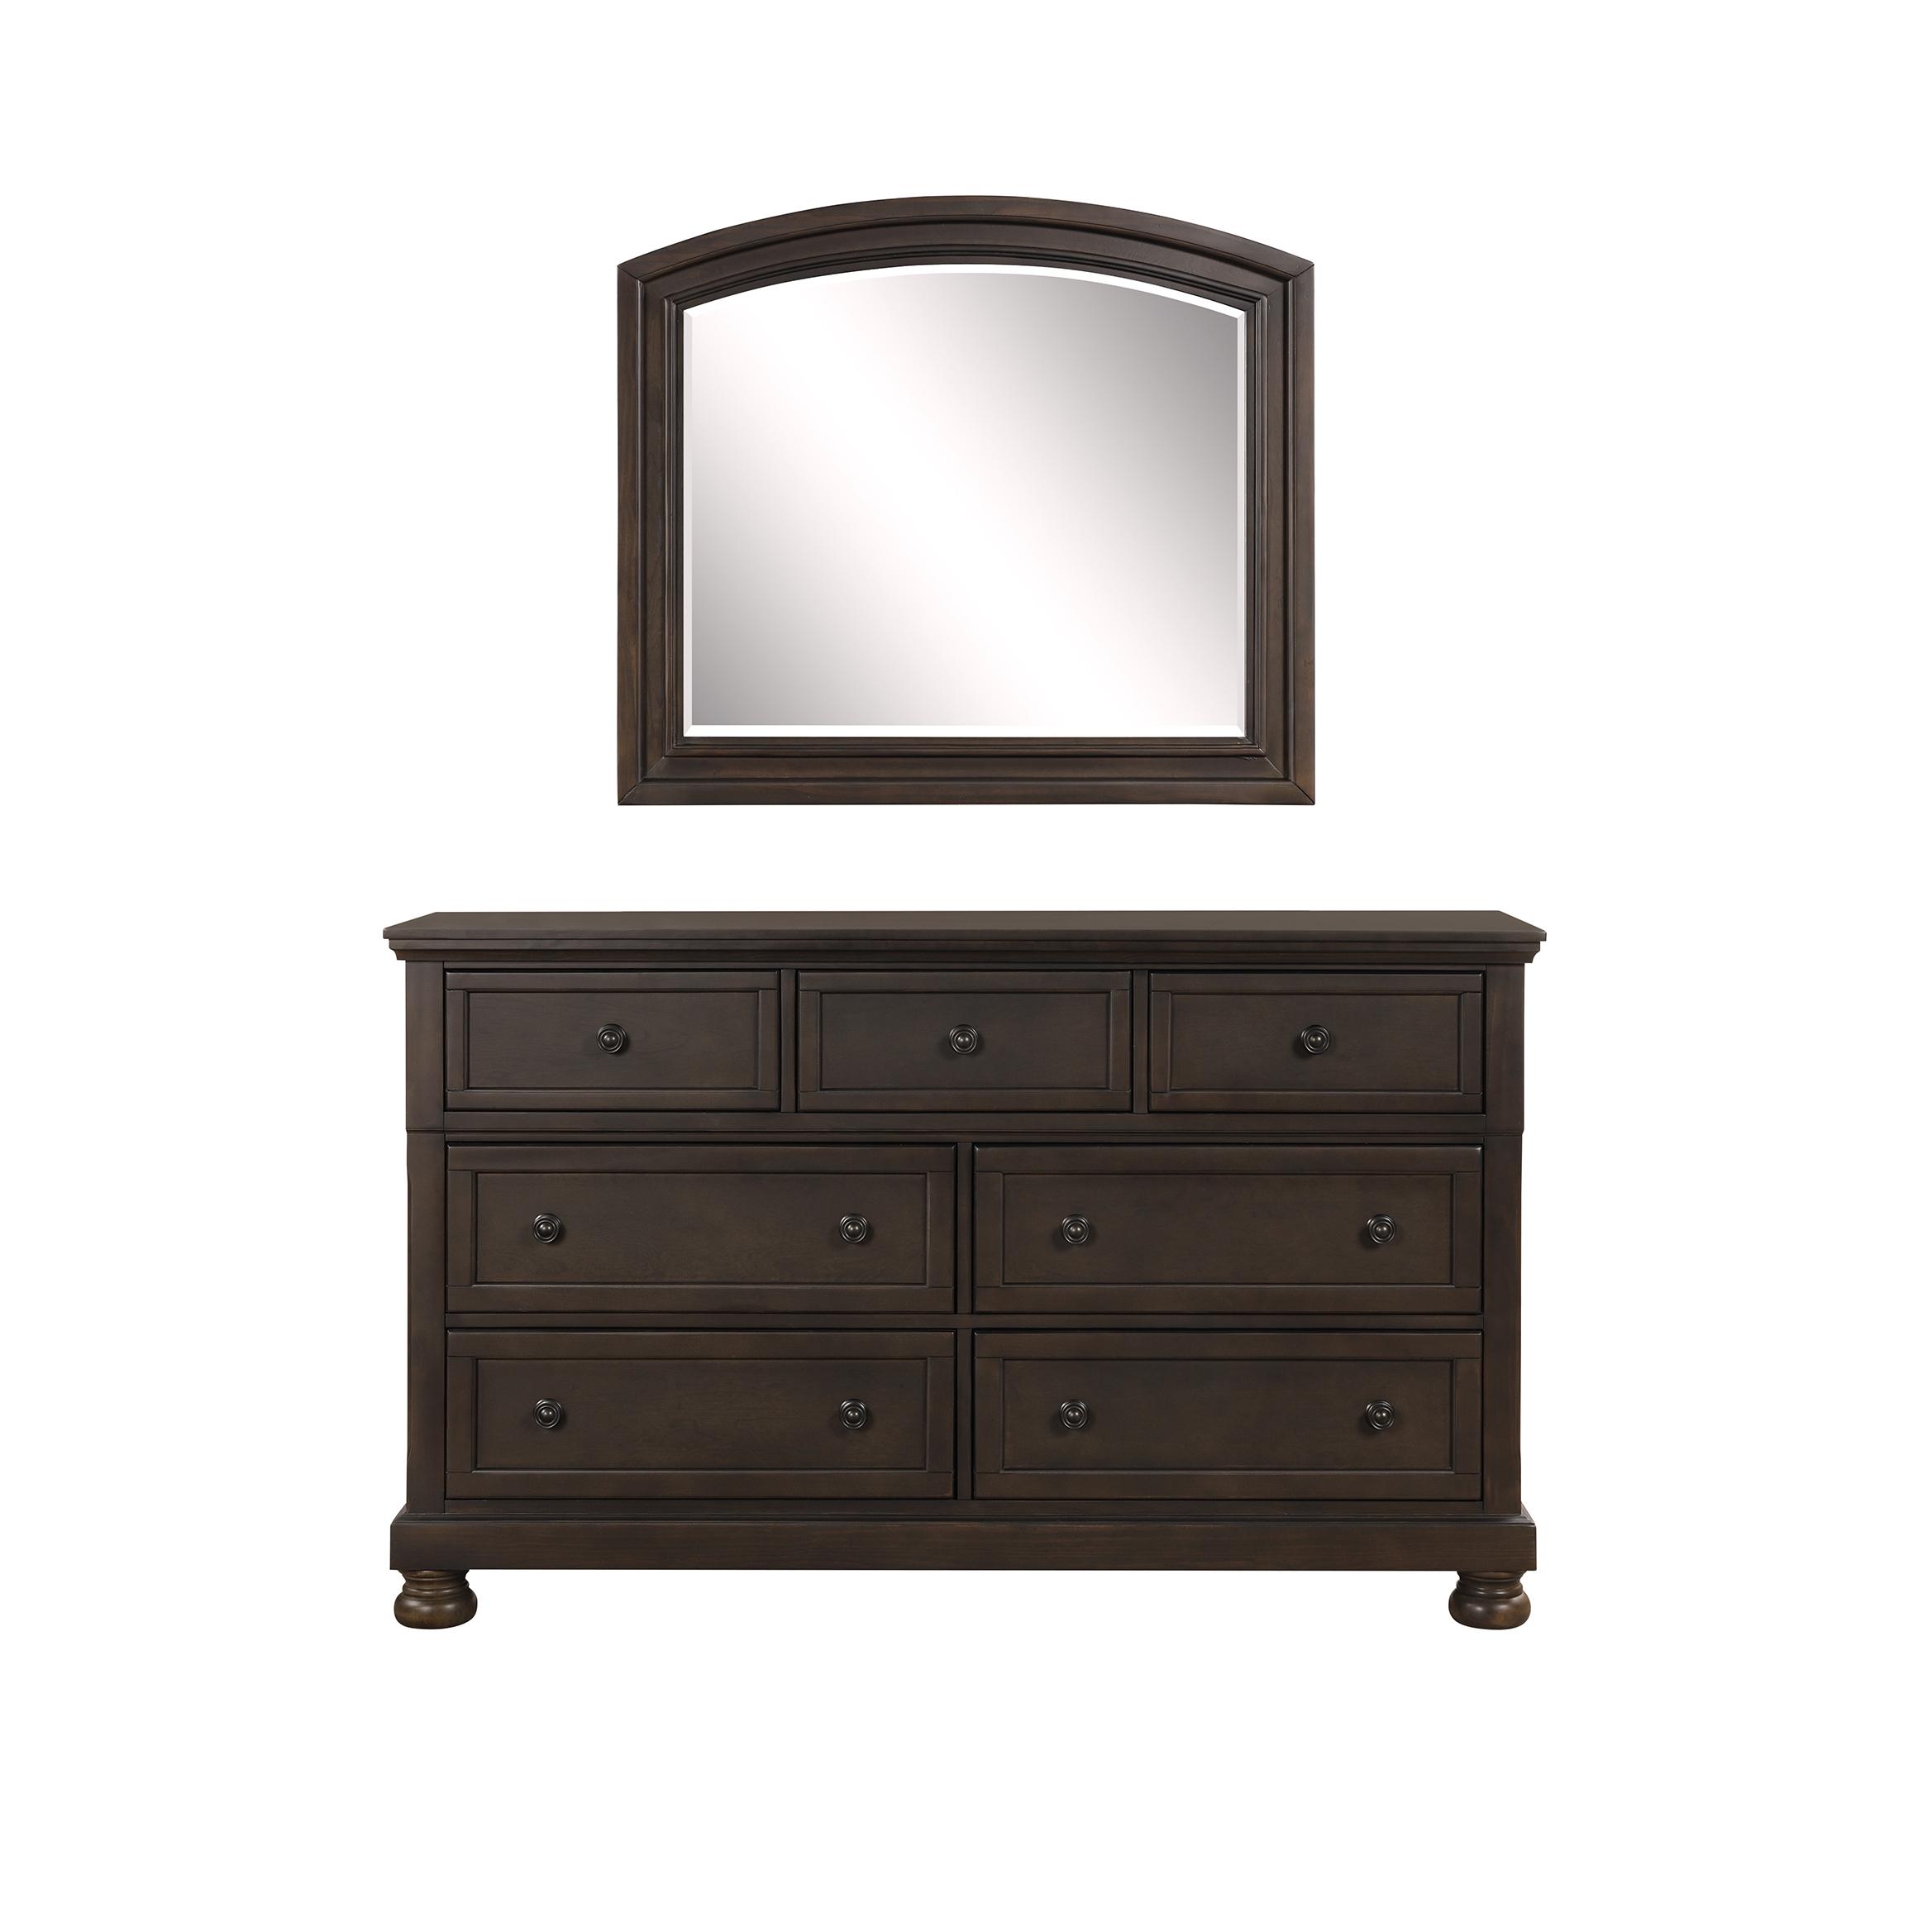 Transitional Dresser w/Mirror 1718GY-5*6-2PC Begonia 1718GY-5*6-2PC in Grayish Brown 